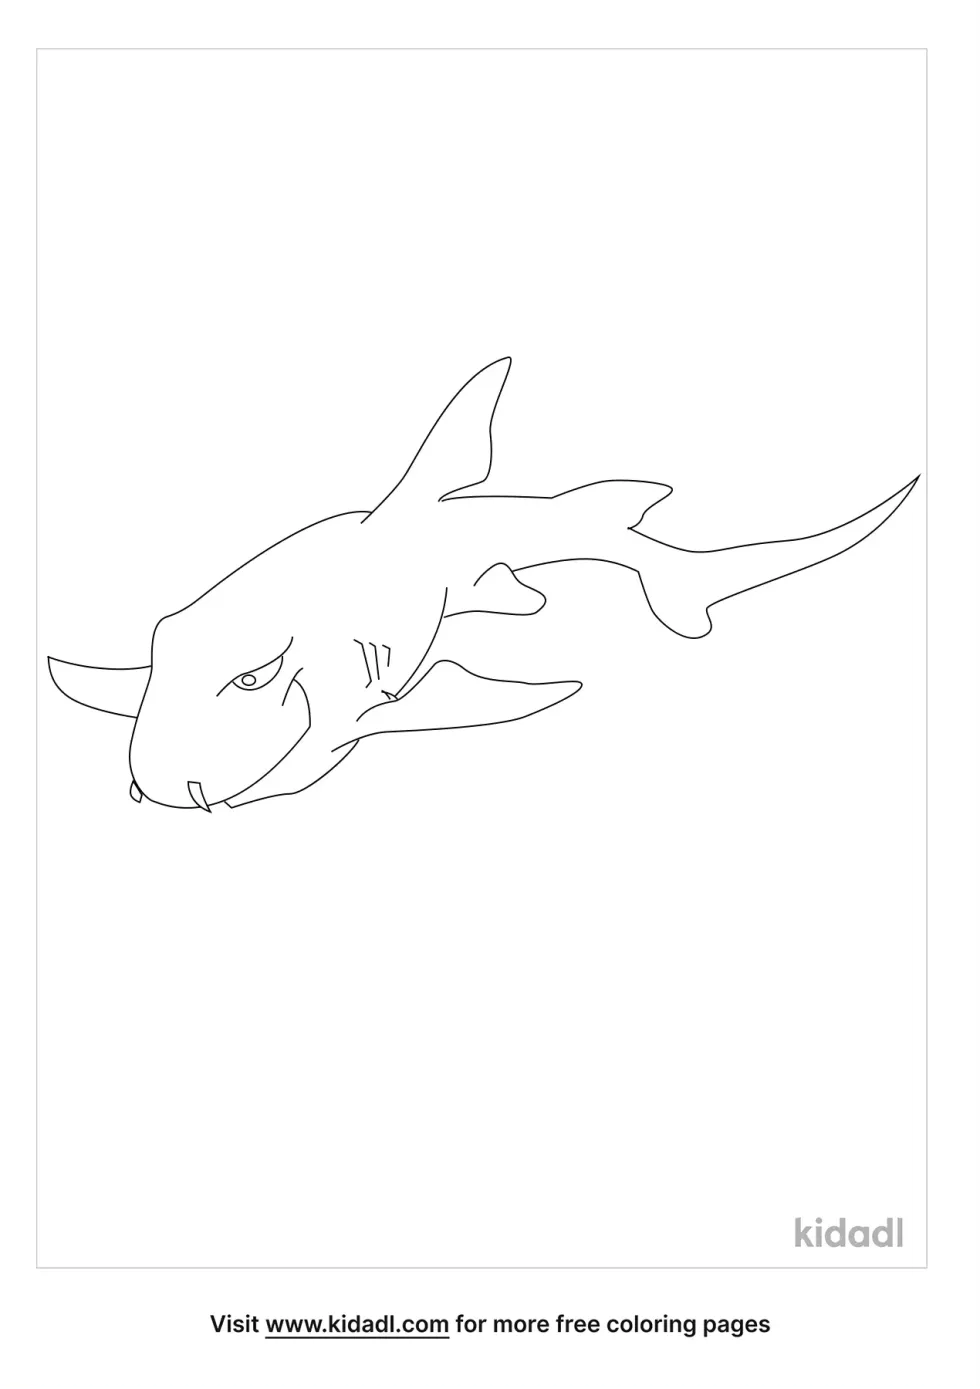 Horn Shark Coloring Page